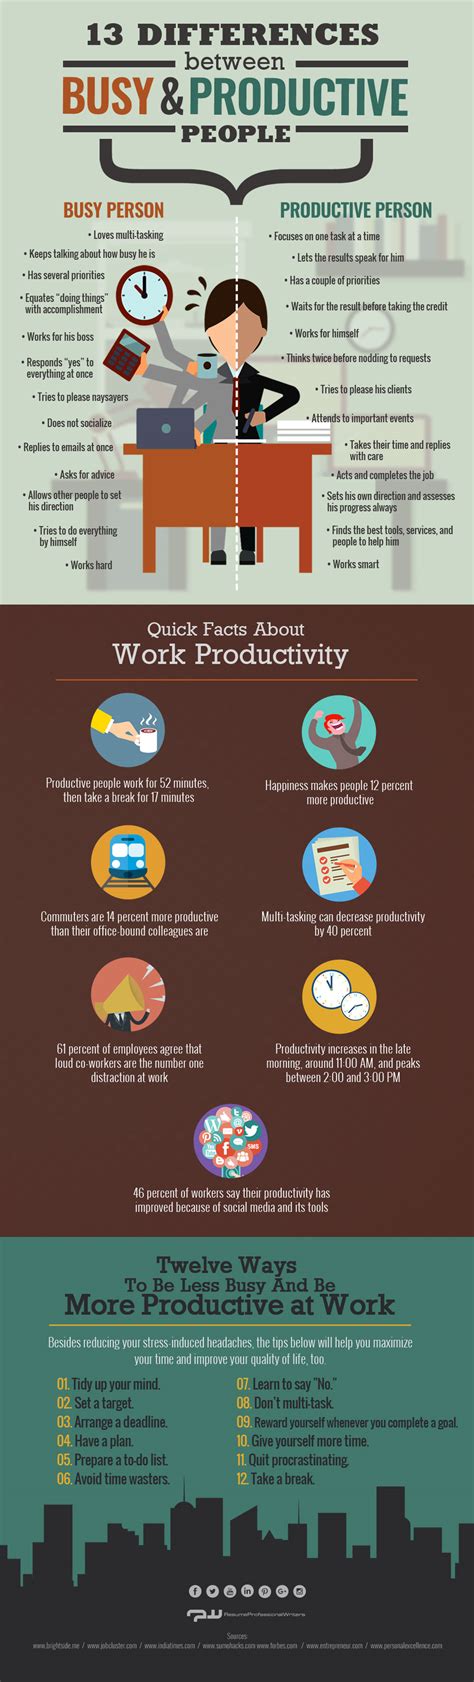 Productive People Vs Busy Ones How Do They Differ Infographic